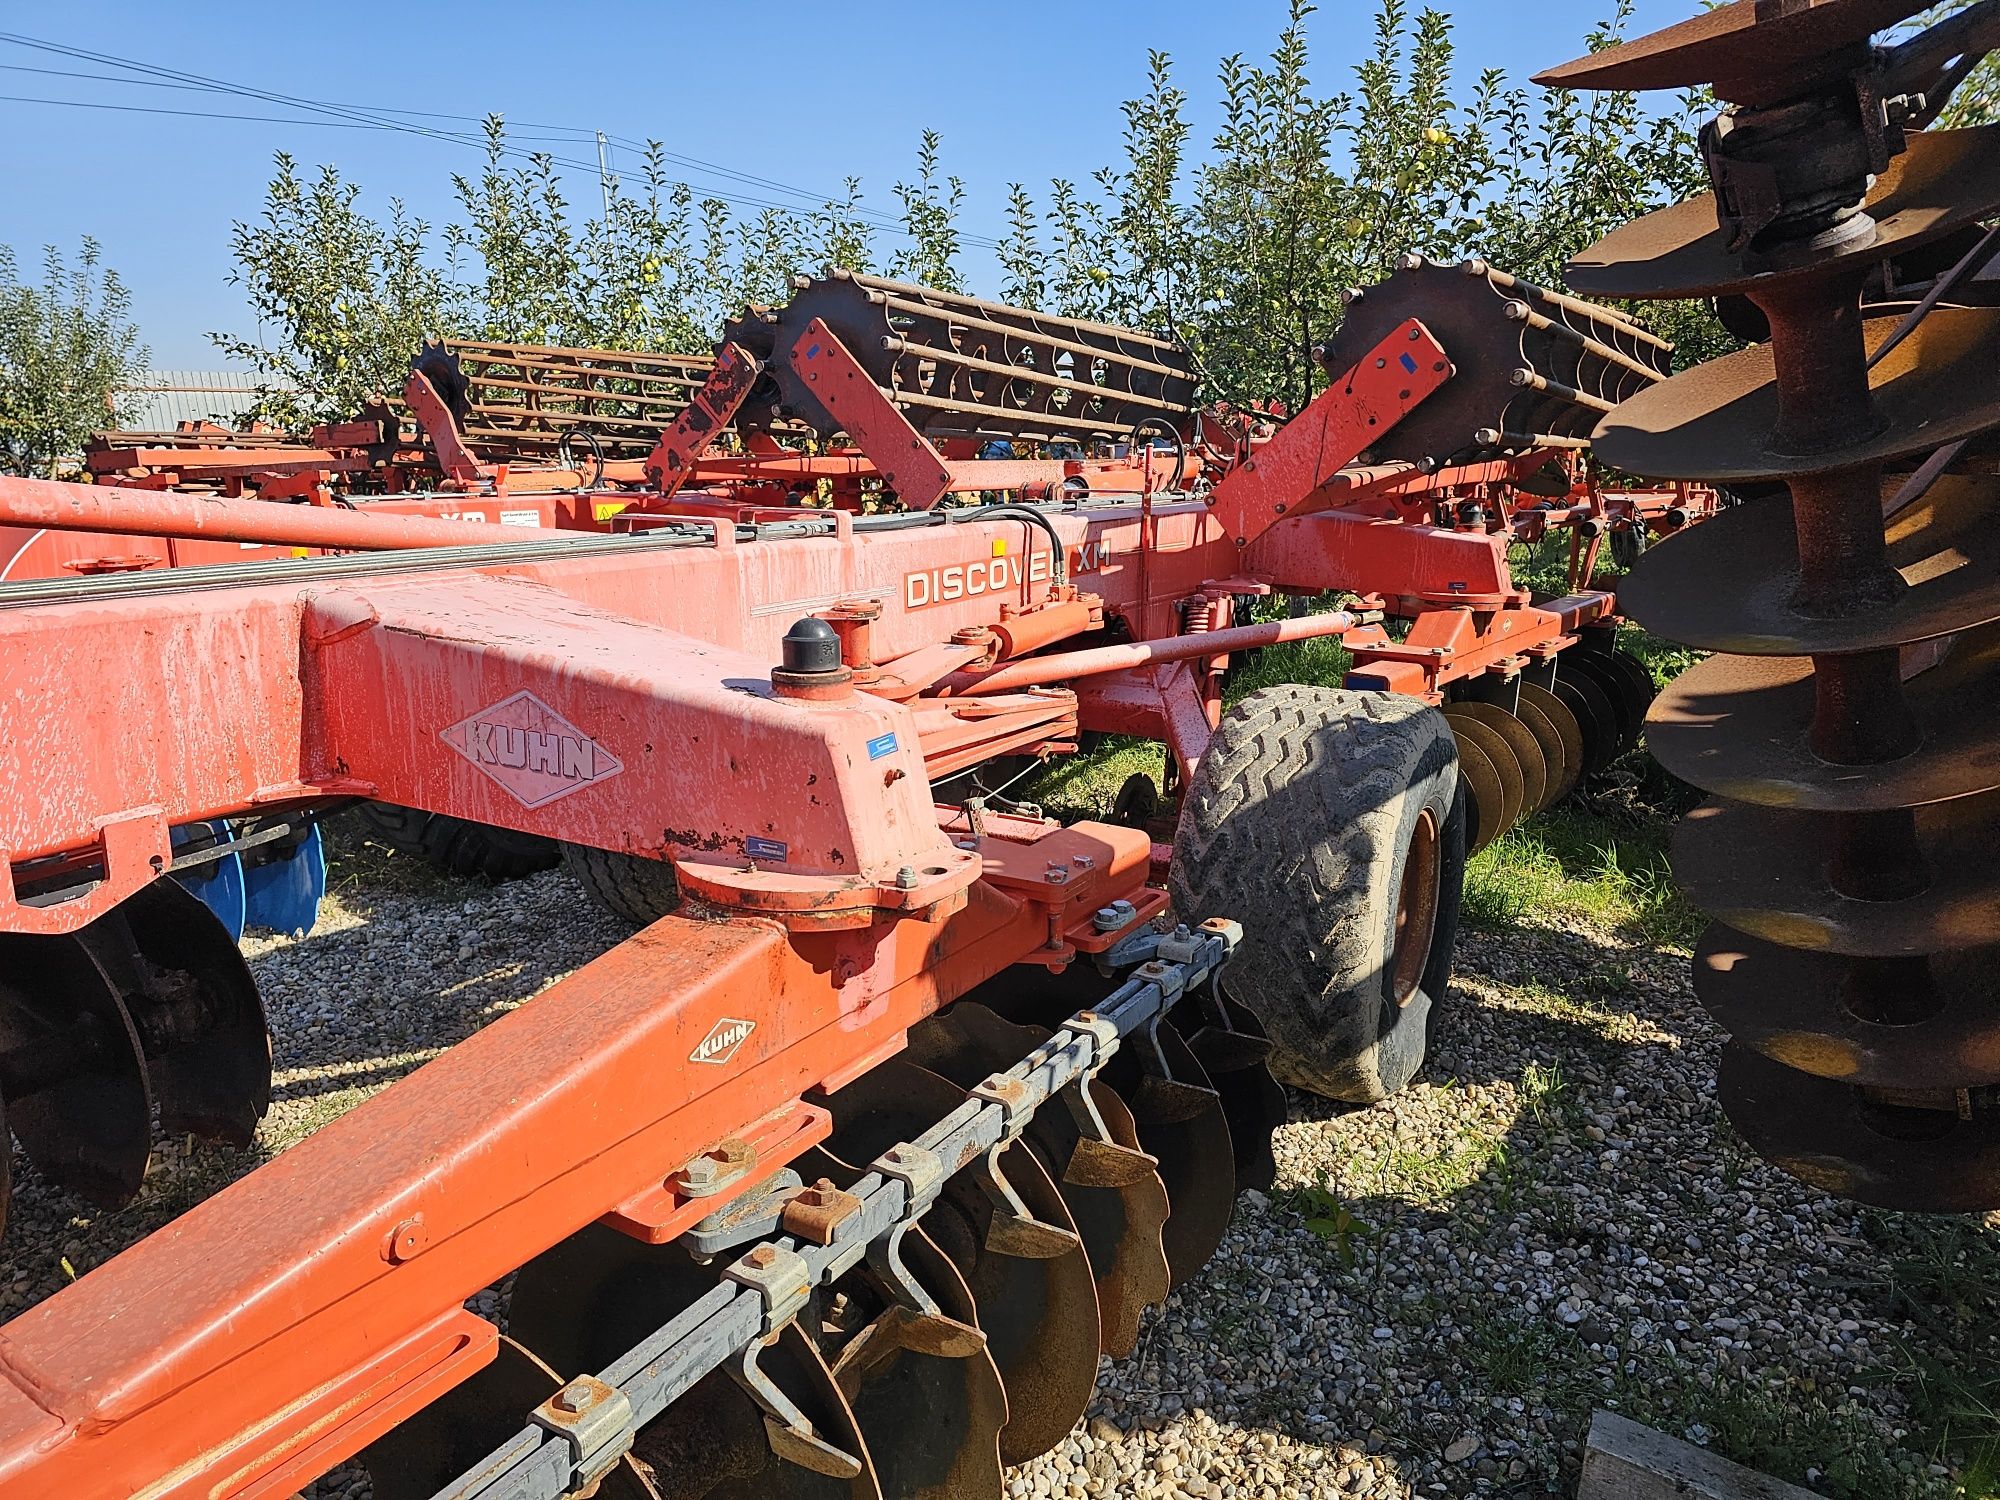 kuhn discover xm 48 disc